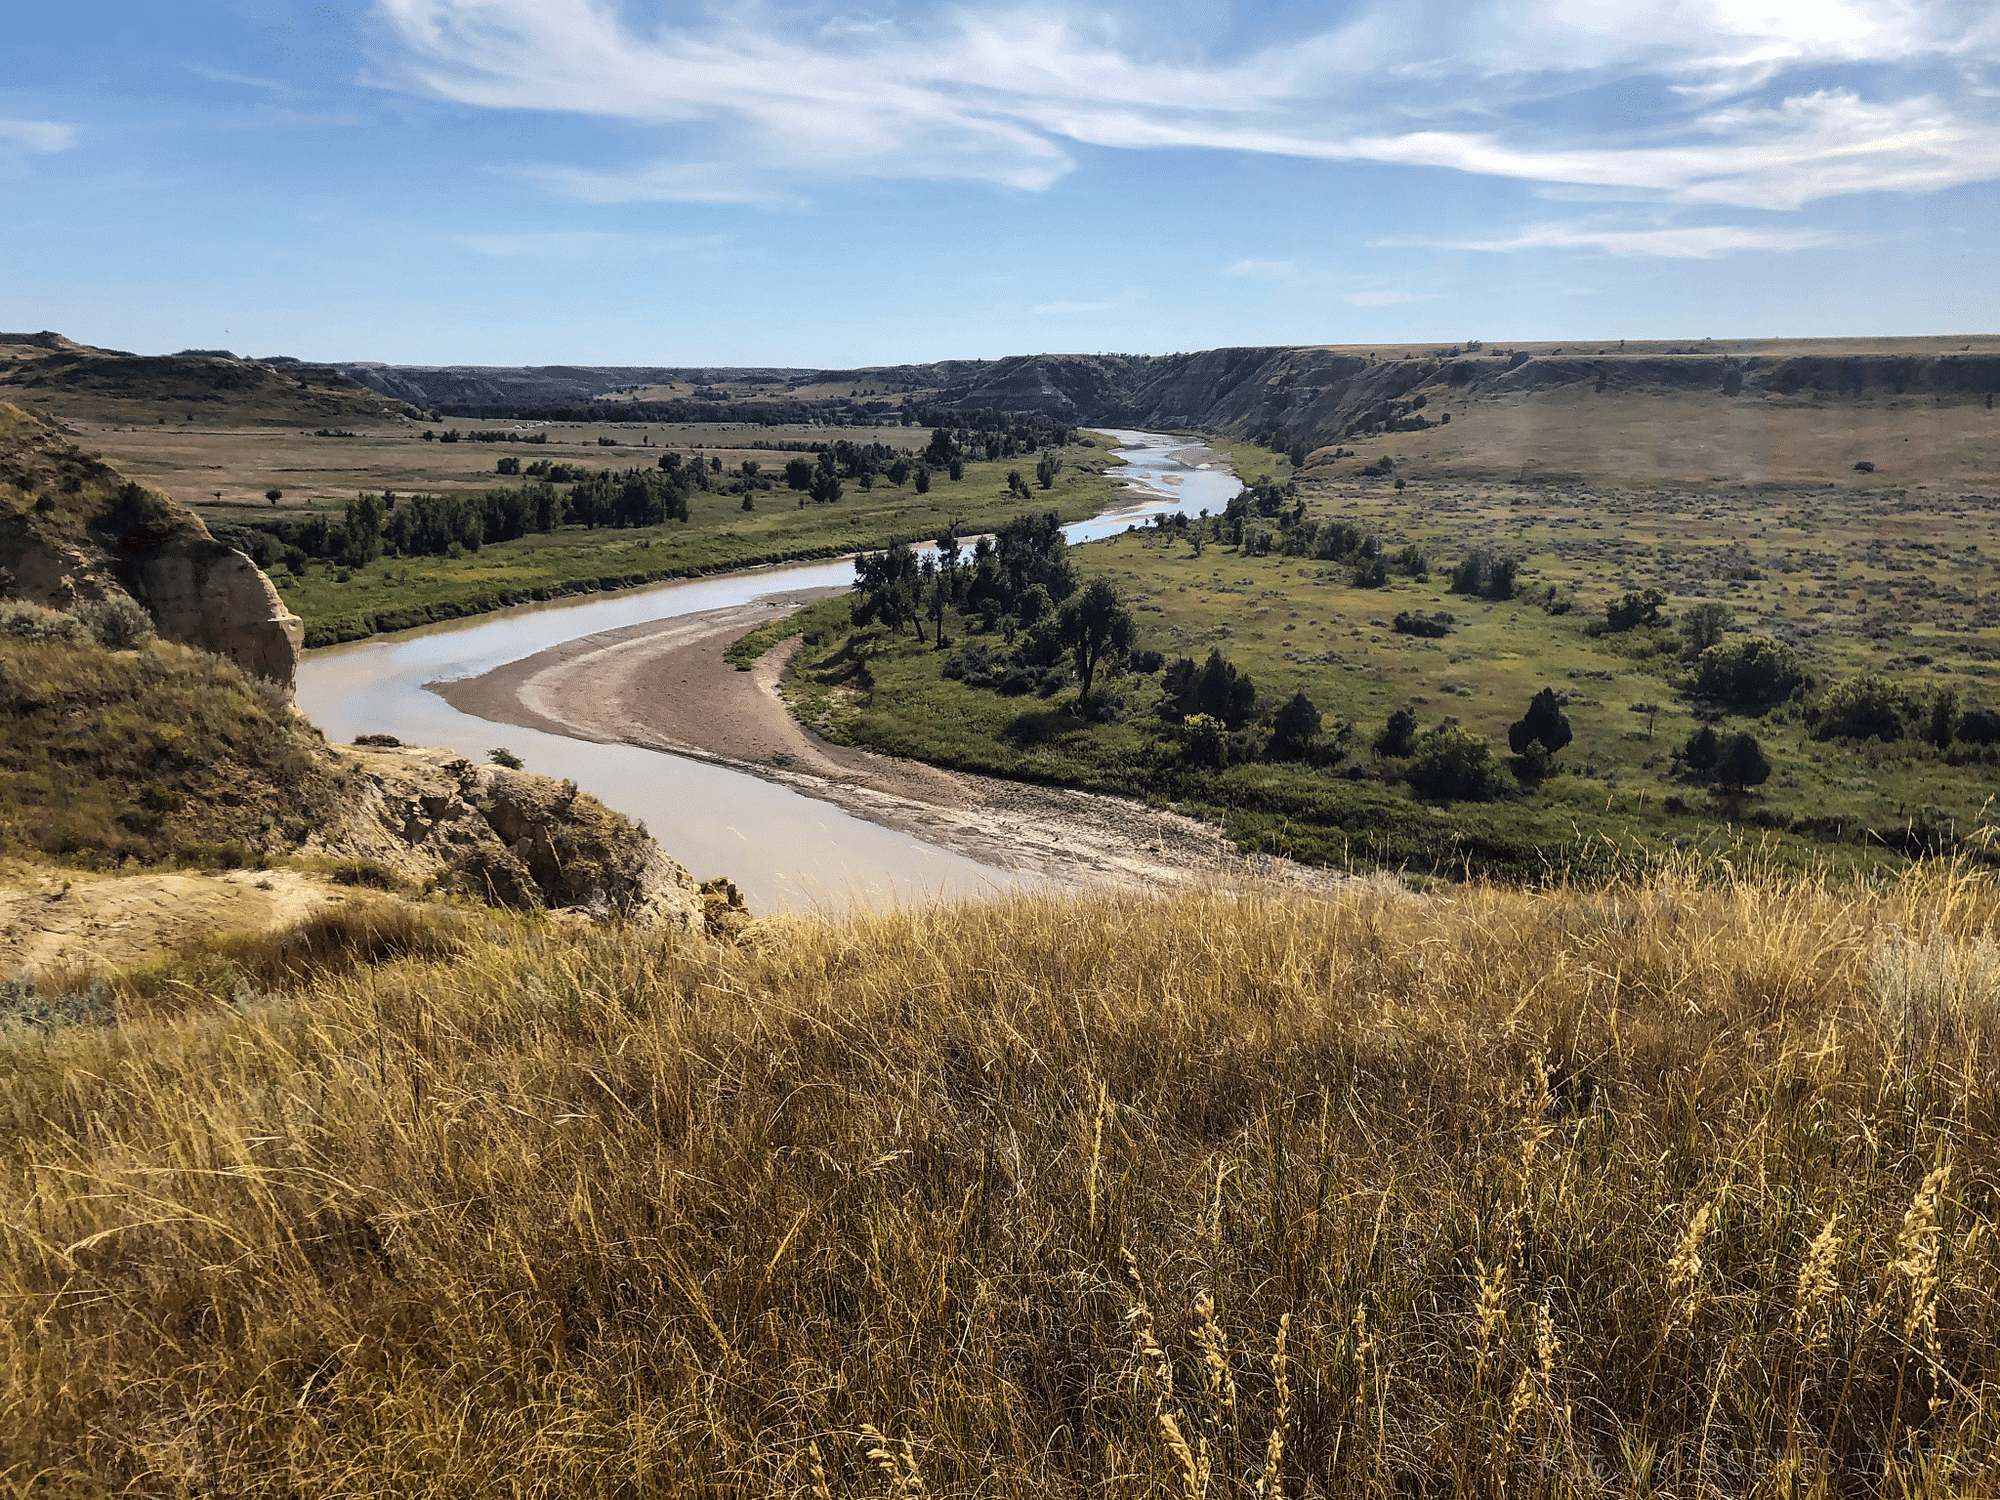 Grasslands in front of a bend in the Little Missouri River along the North Achenbach Trail